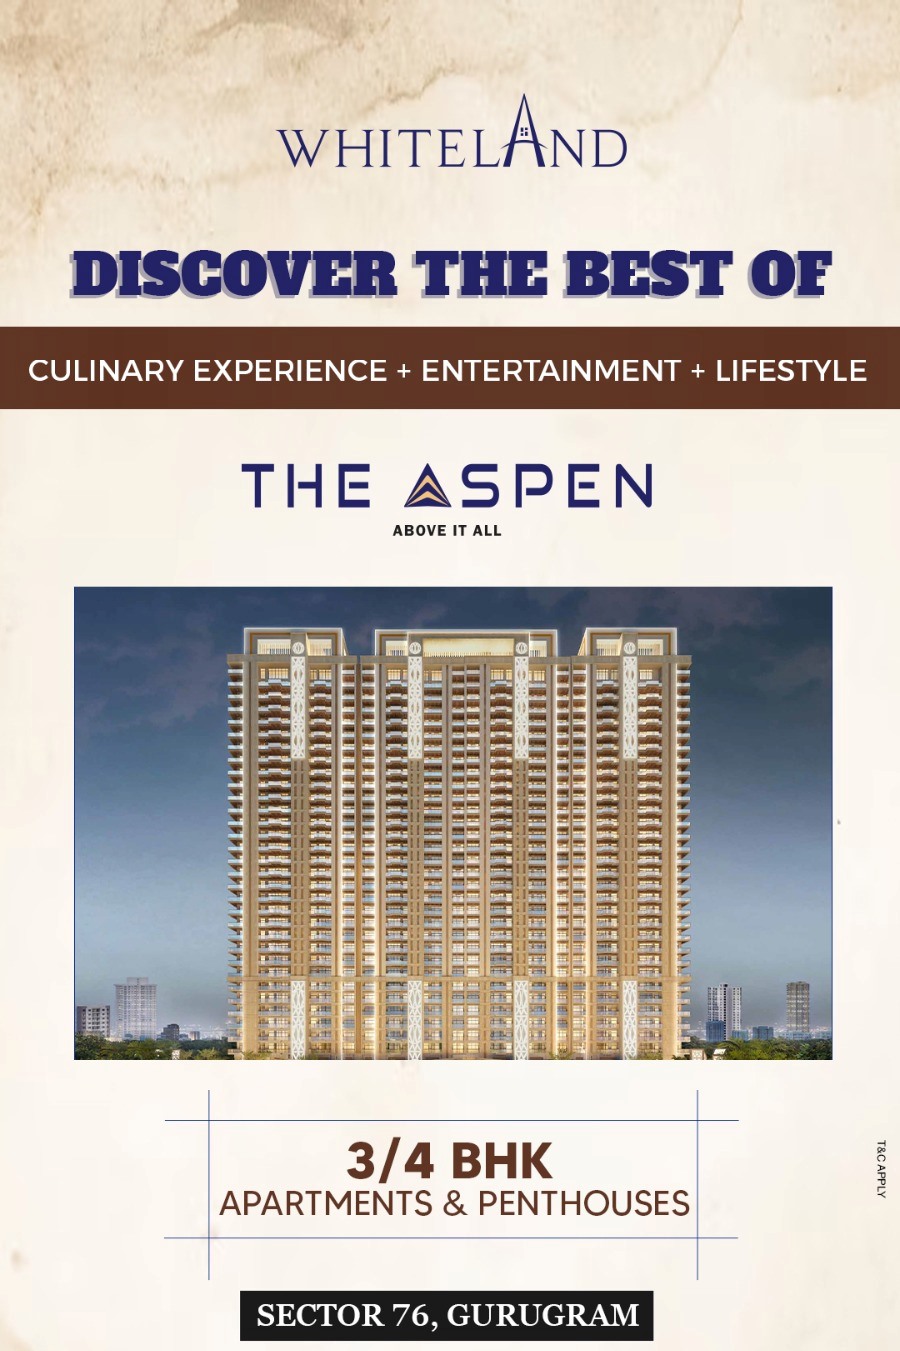 Book 3 & 4 BHK Apartments & Penthouses at Whiteland The Aspen in Sector 76, Gurgaon Update